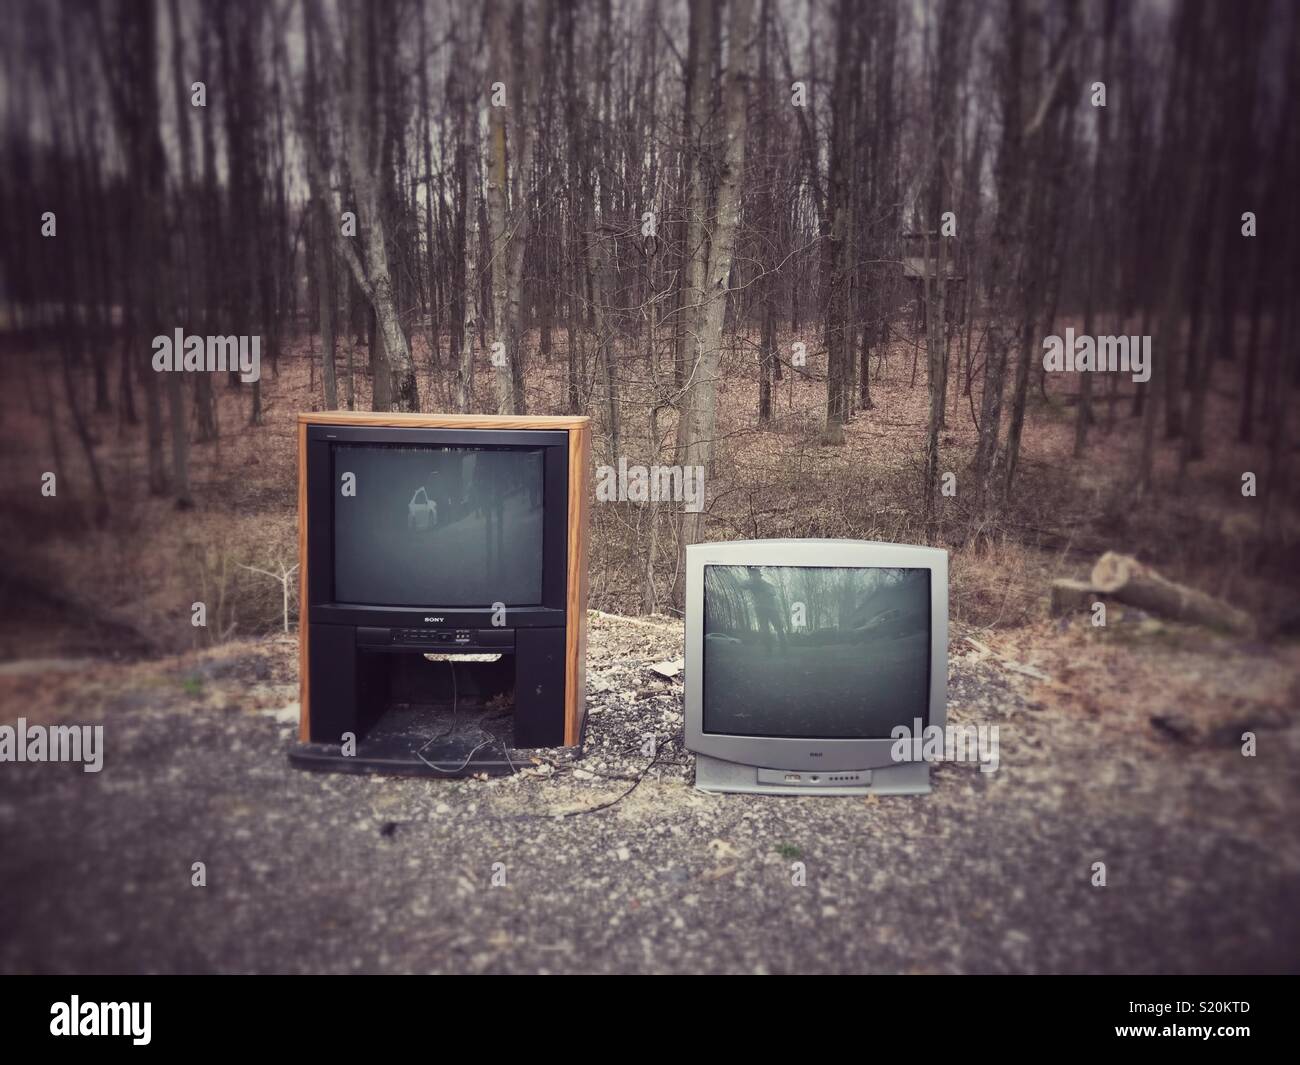 Two old school tube televisions sitting outside in the woods. Stock Photo